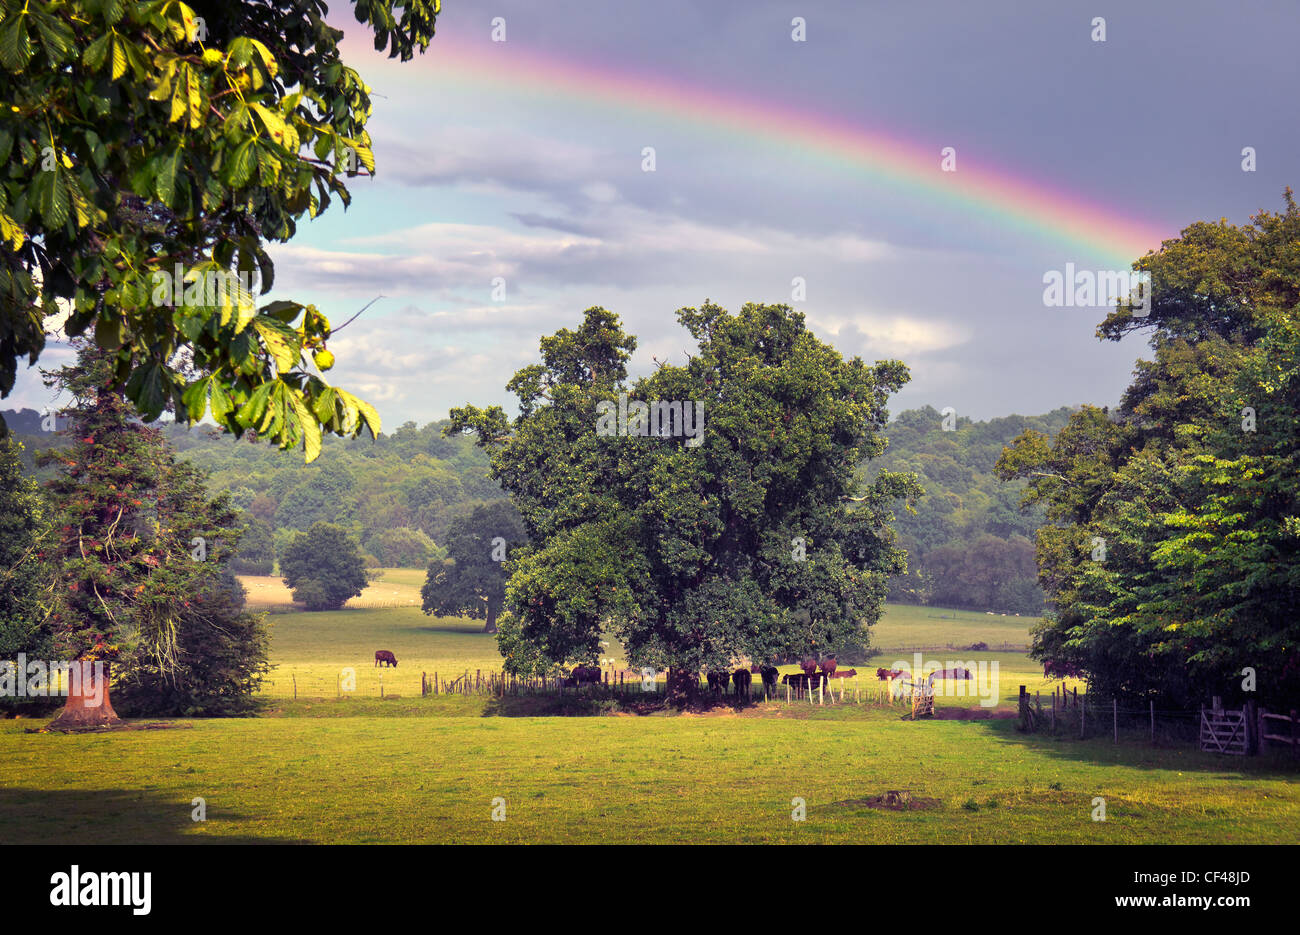 A rainbow stretching over cattle grazing in the Kent countryside. Stock Photo